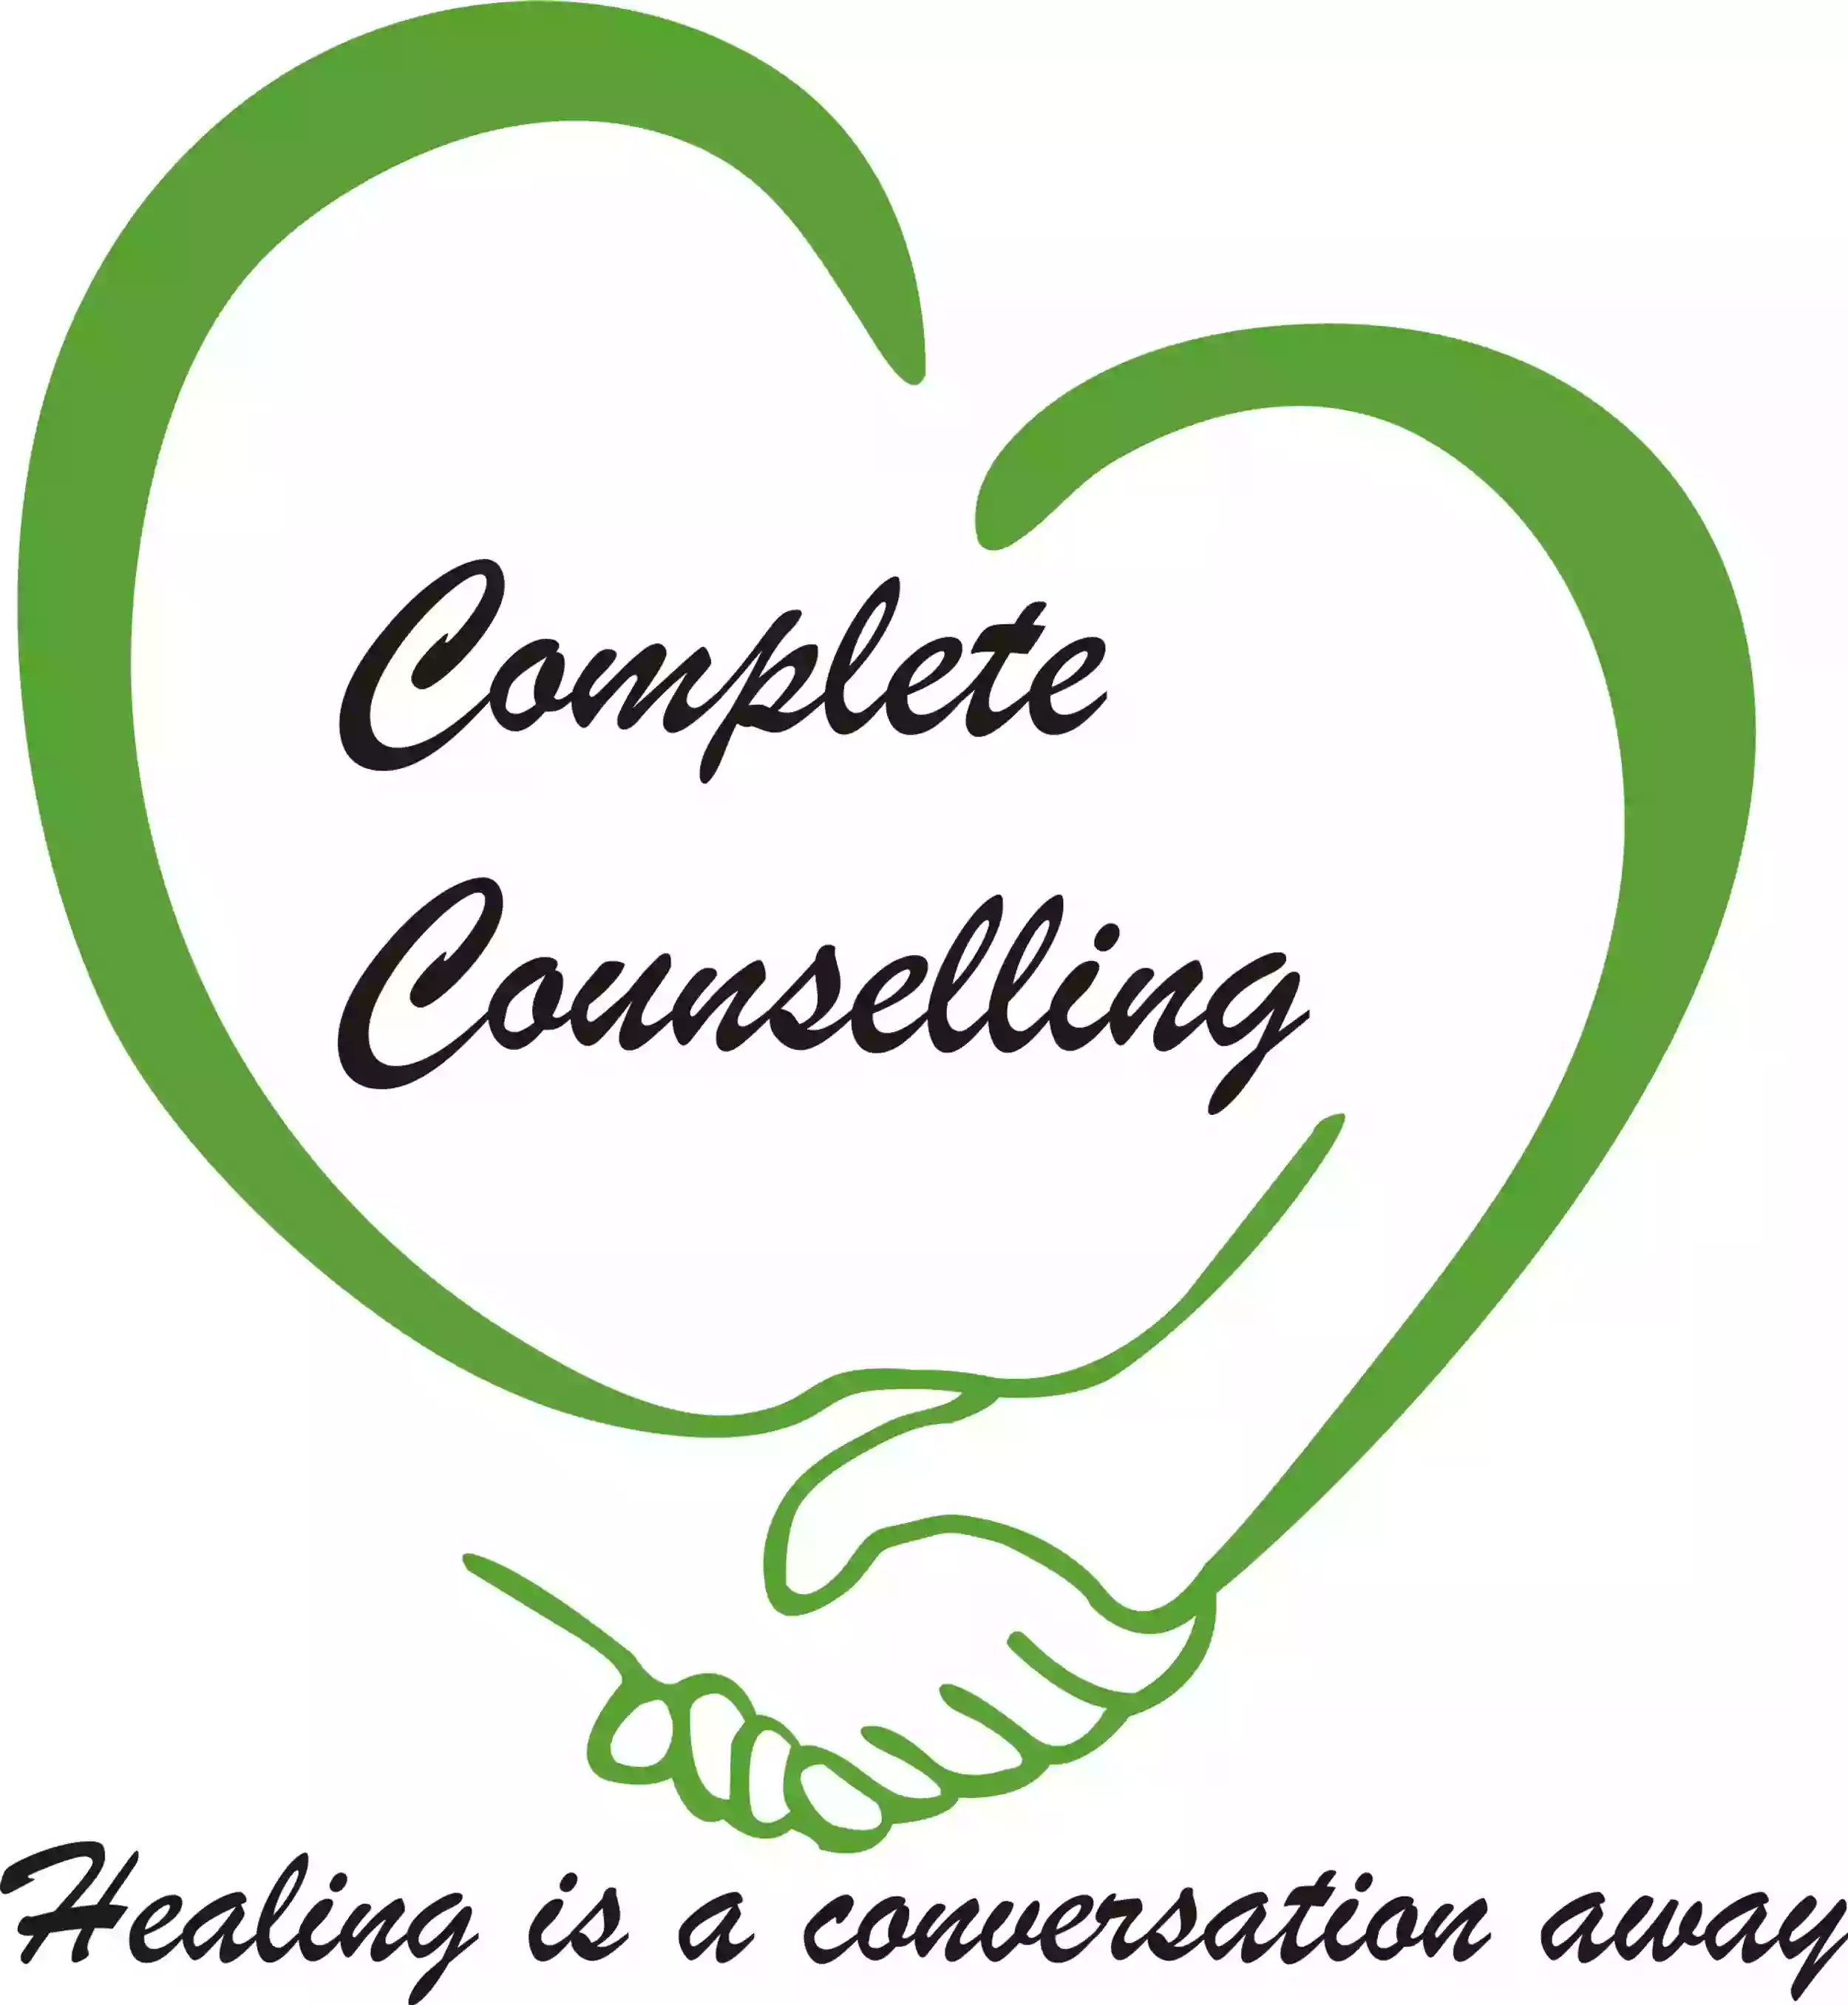 Complete Counselling located at Fairview Retreat